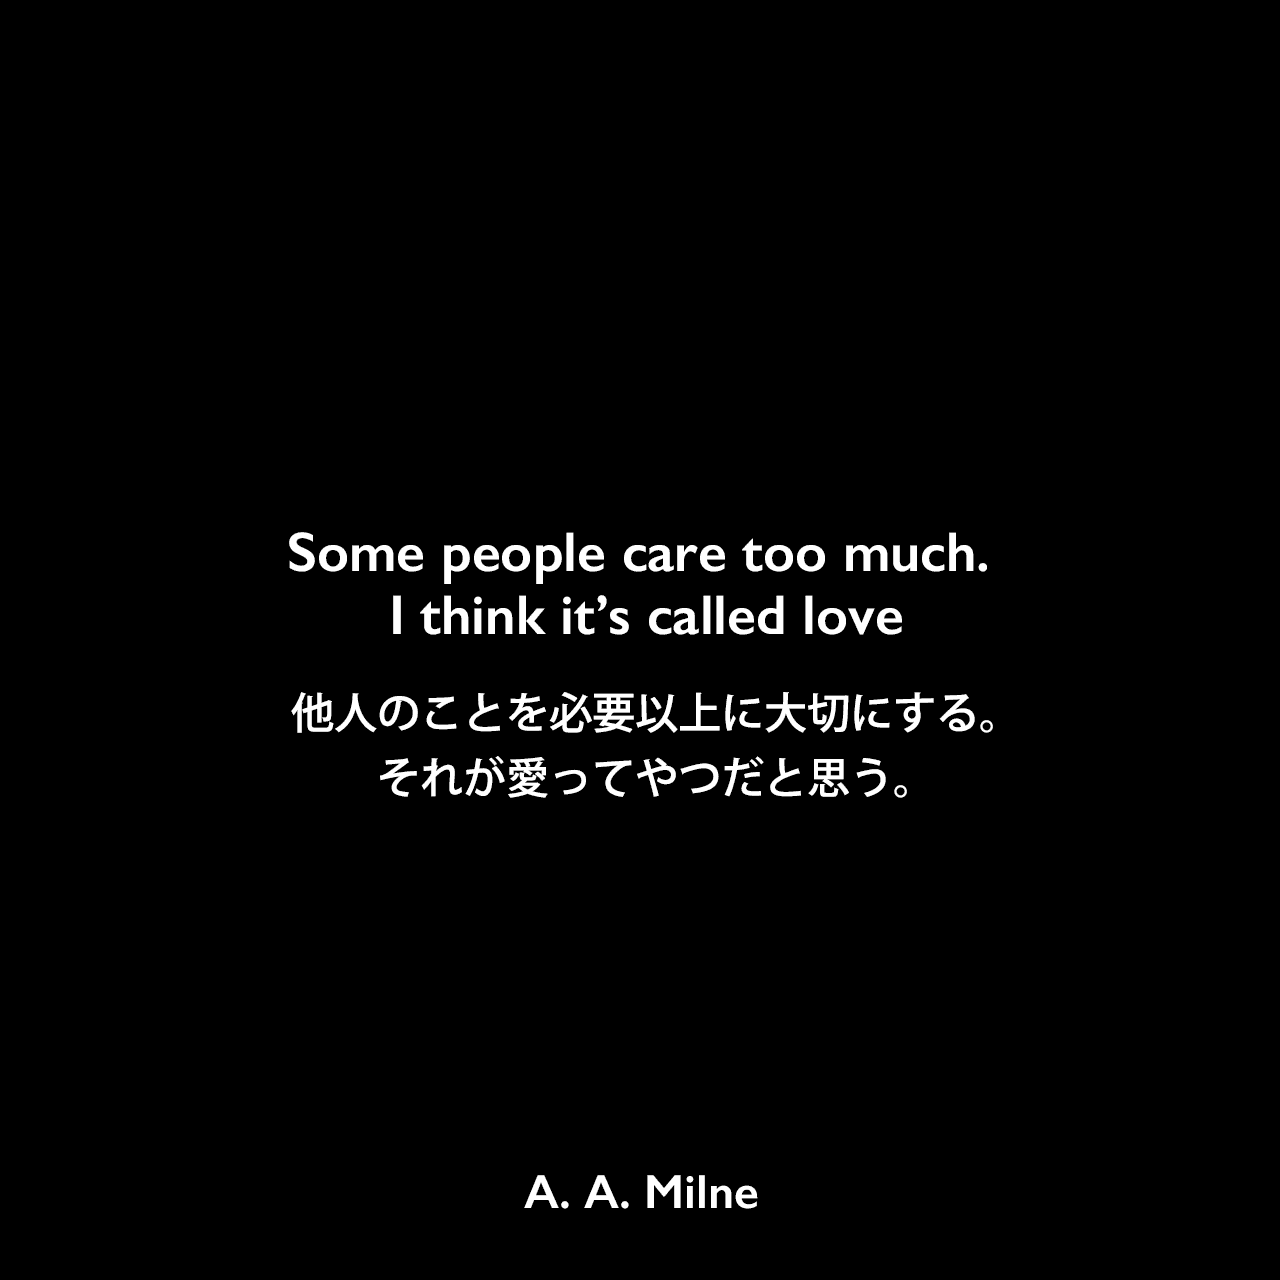 Some people care too much. I think it’s called love.他人のことを必要以上に大切にする。 それが愛ってやつだと思う。